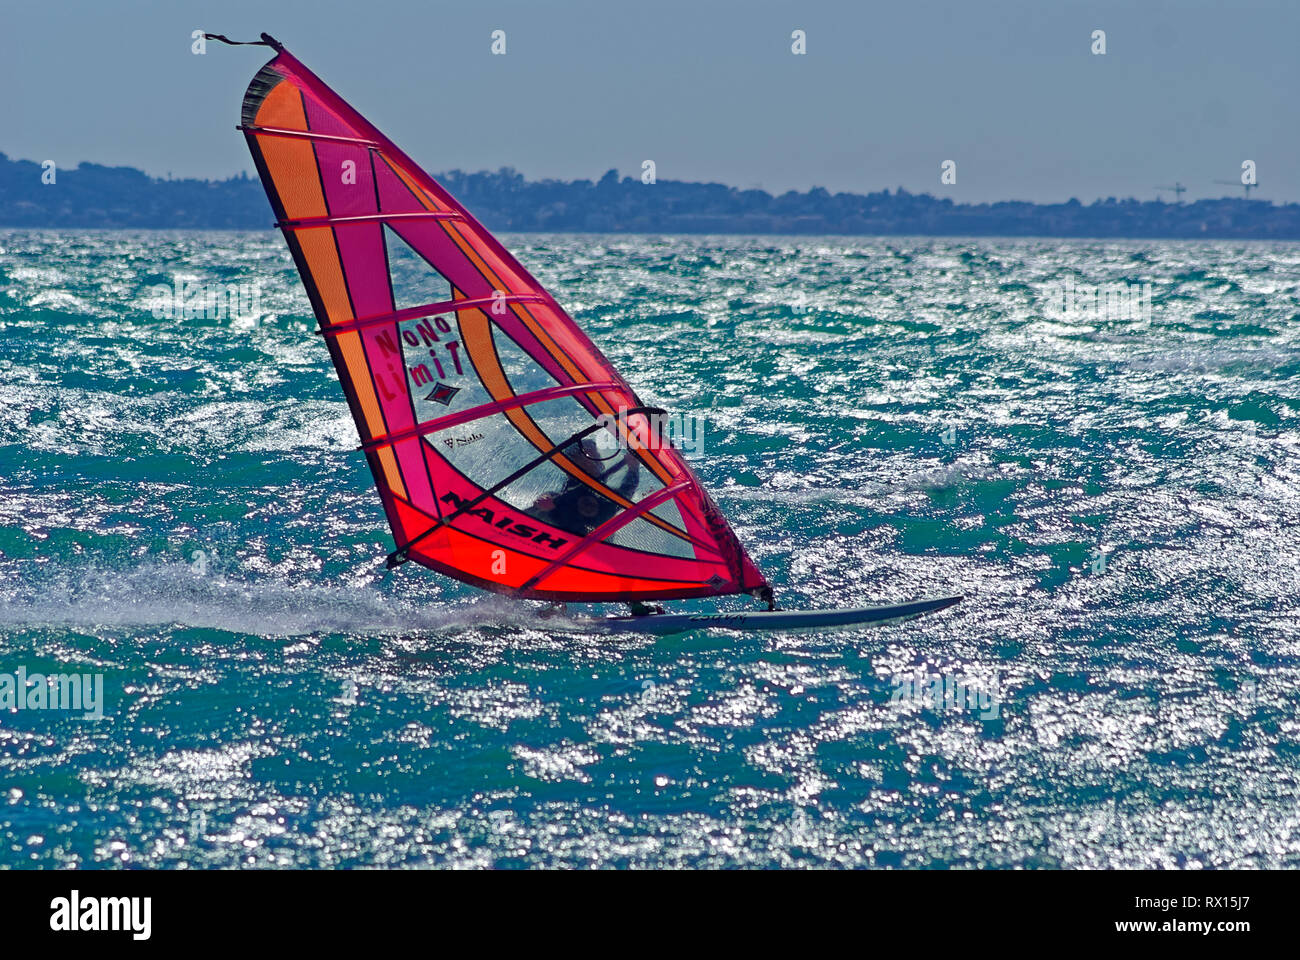 windsurfer at full speed during a strong windy day in mediterranean sea (St Laurent du Var , France) Stock Photo